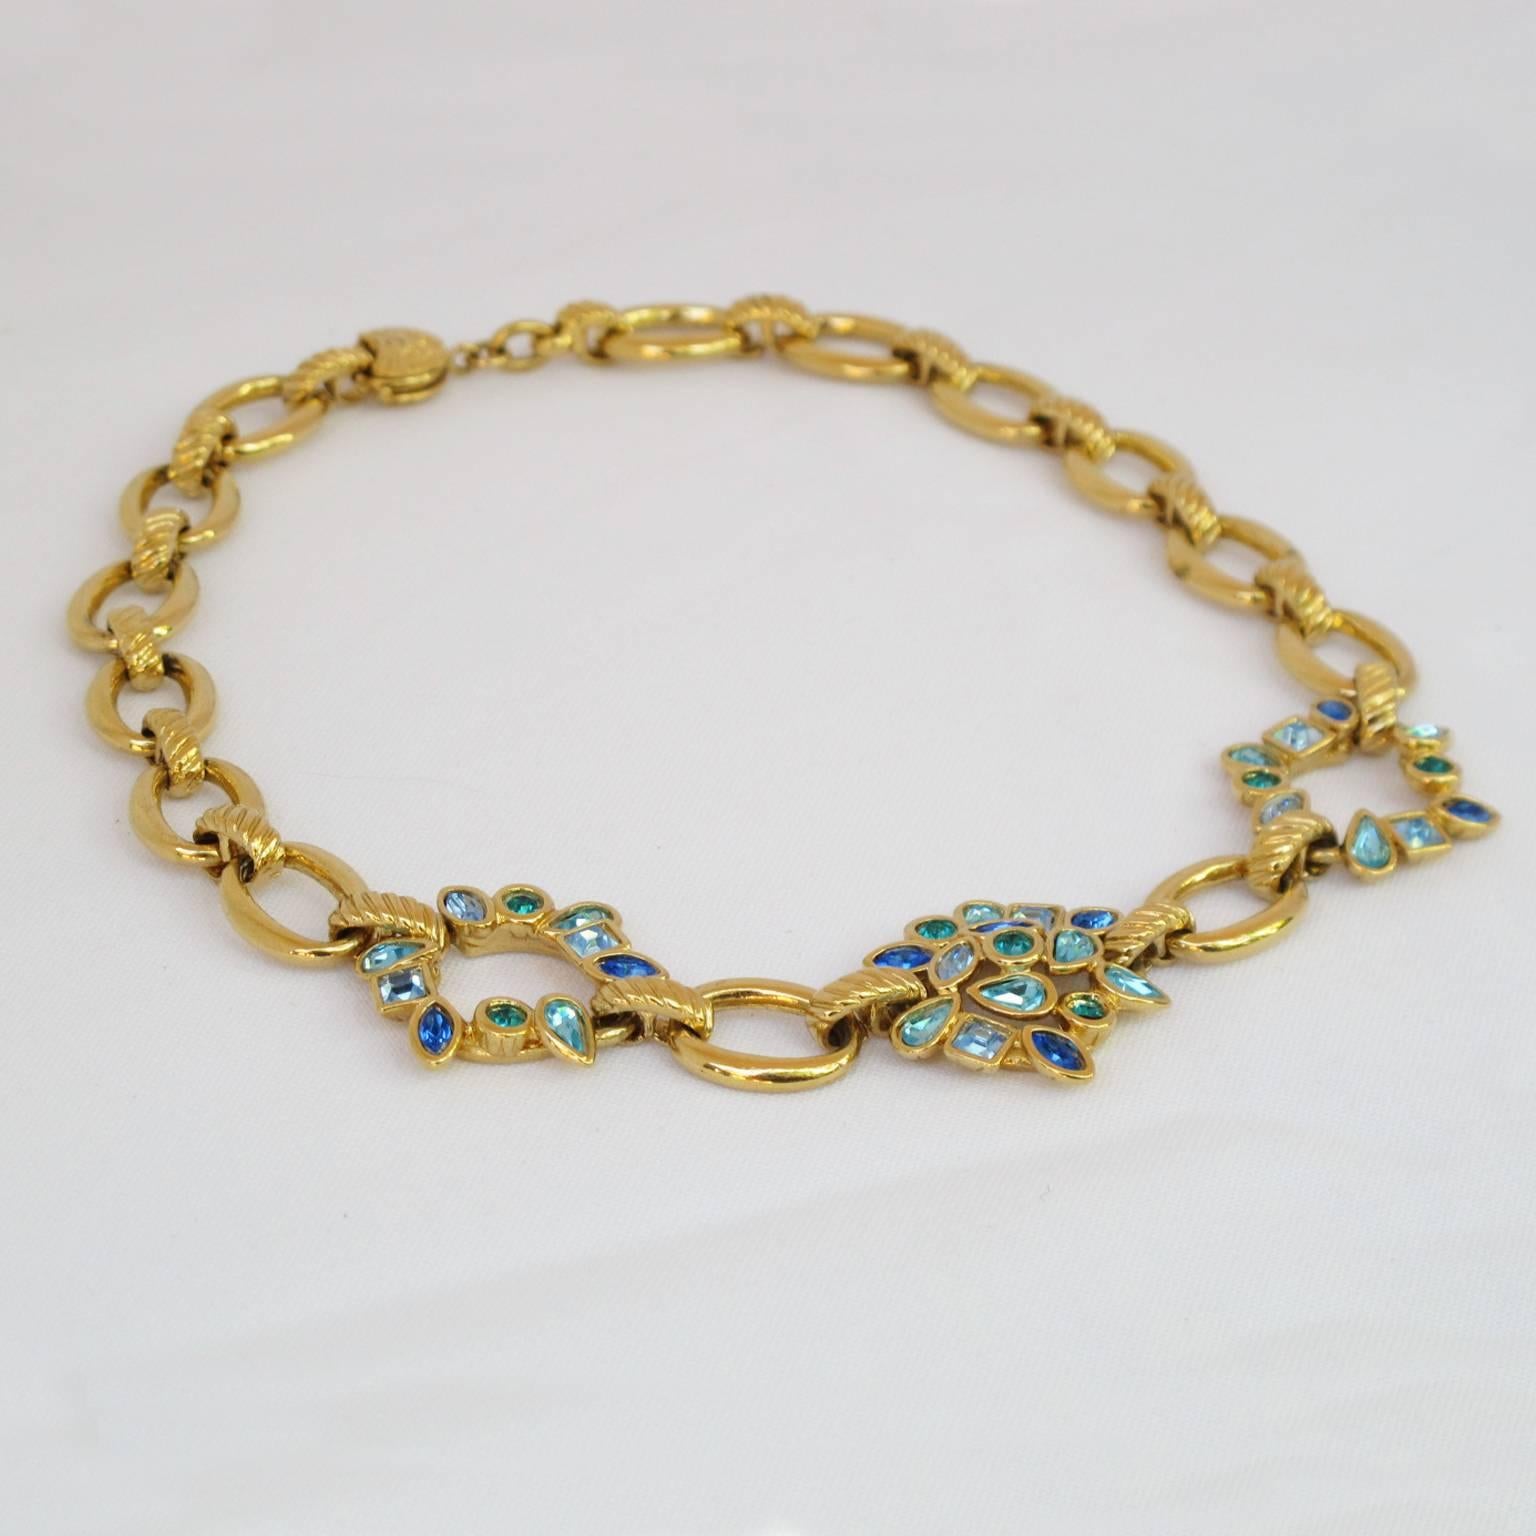 Women's Yves Saint Laurent 1980s Necklace Goldtone with blue-green Rhinestones